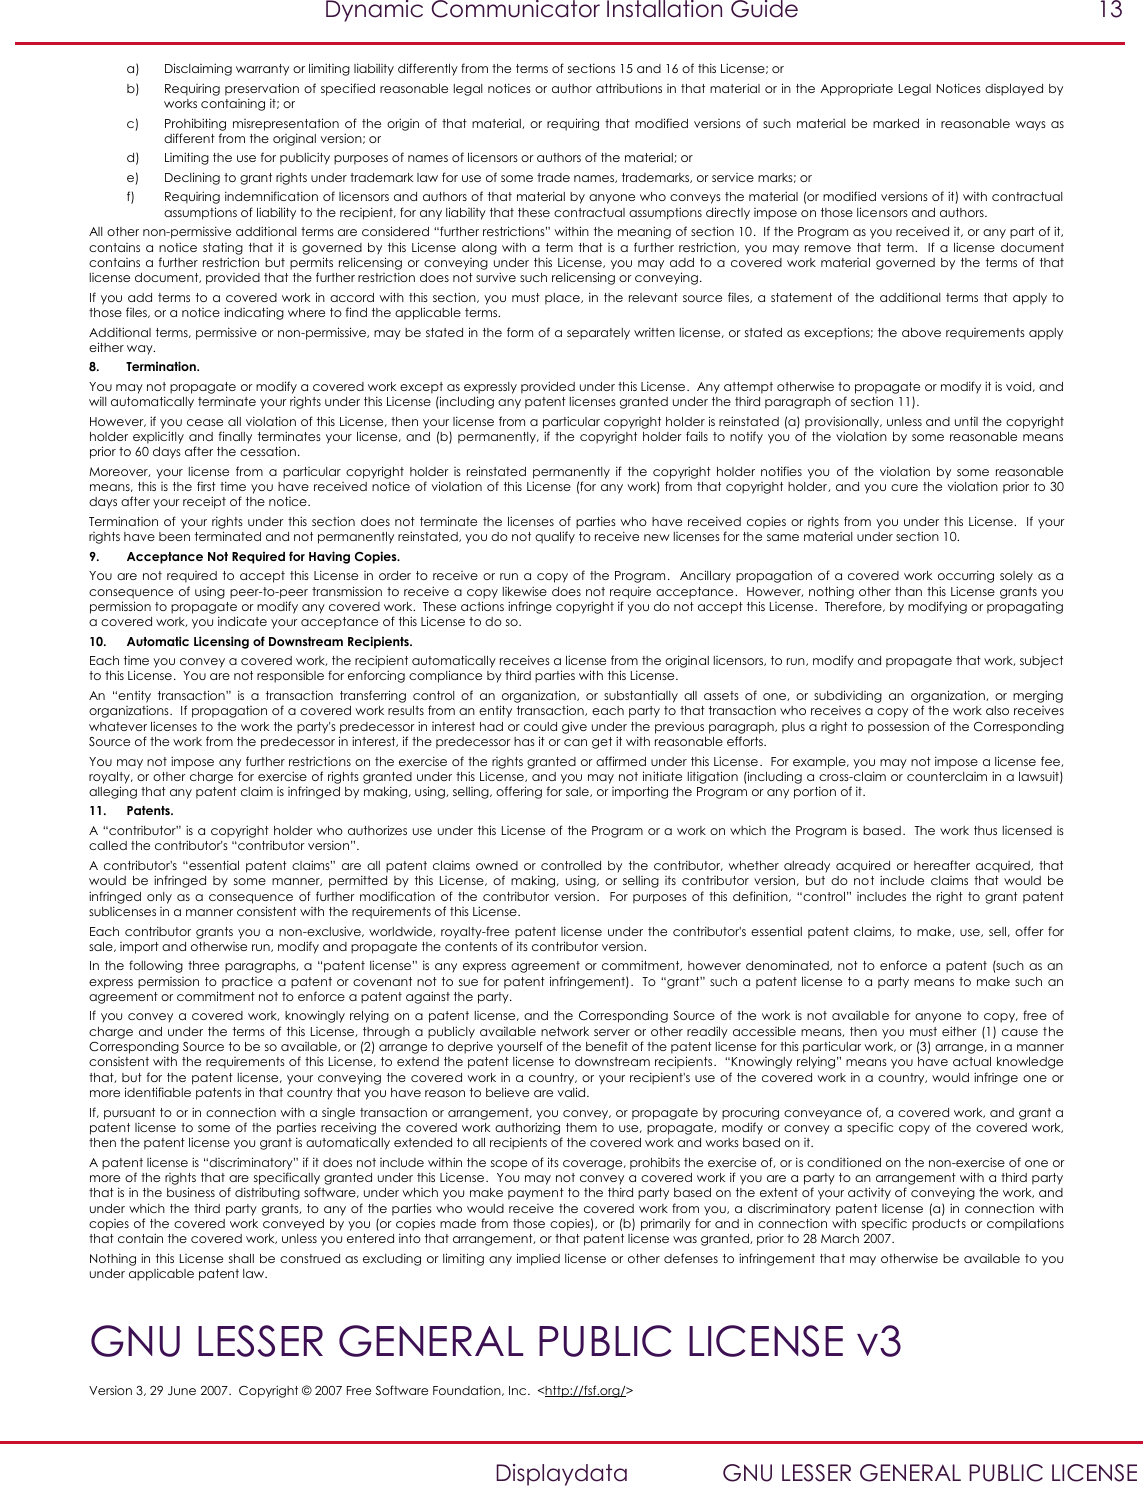   Dynamic Communicator Installation Guide  13    Displaydata  GNU LESSER GENERAL PUBLIC LICENSE a) Disclaiming warranty or limiting liability differently from the terms of sections 15 and 16 of this License; or b) Requiring preservation of specified reasonable legal notices or author attributions in that material or in the Appropriate Legal Notices displayed by works containing it; or c) Prohibiting  misrepresentation of  the  origin  of that  material, or  requiring that  modified versions of  such material  be marked  in  reasonable  ways  as different from the original version; or d) Limiting the use for publicity purposes of names of licensors or authors of the material; or e) Declining to grant rights under trademark law for use of some trade names, trademarks, or service marks; or f) Requiring indemnification of licensors and authors of that material by anyone who conveys the material (or modified versions of it) with contractual assumptions of liability to the recipient, for any liability that these contractual assumptions directly impose on those licensors and authors. All other non-permissive additional terms are considered “further restrictions” within the meaning of section 10.  If the Program as you received it, or any part of it, contains a  notice  stating  that it  is governed  by this License along with  a term  that is a  further  restriction,  you  may remove  that term.   If  a license  document contains a further restriction but permits relicensing or  conveying under this License, you may add to  a  covered work  material governed by the terms of that license document, provided that the further restriction does not survive such relicensing or conveying. If you add terms to a covered work in accord with this section, you must place, in the  relevant  source files, a statement of  the additional terms that apply to those files, or a notice indicating where to find the applicable terms. Additional terms, permissive or non-permissive, may be stated in the form of a separately written license, or stated as exceptions; the above requirements apply either way. 8. Termination. You may not propagate or modify a covered work except as expressly provided under this License.  Any attempt otherwise to propagate or modify it is void, and will automatically terminate your rights under this License (including any patent licenses granted under the third paragraph of section 11). However, if you cease all violation of this License, then your license from a particular copyright holder is reinstated (a) provisionally, unless and until the copyright holder explicitly and finally terminates your license, and (b) permanently, if the  copyright holder fails to notify  you  of the violation by some reasonable means prior to 60 days after the cessation. Moreover,  your  license  from  a  particular  copyright  holder  is  reinstated  permanently  if  the  copyright  holder  notifies  you  of  the  violation  by  some  reasonable means, this is the first time you have received notice of violation of this License (for any work) from that copyright holder, and you cure the violation prior to 30 days after your receipt of the notice. Termination of your rights under  this section  does not  terminate  the licenses  of parties who have received copies or rights from you  under  this License.   If your rights have been terminated and not permanently reinstated, you do not qualify to receive new licenses for the same material under section 10. 9. Acceptance Not Required for Having Copies. You are not required to  accept  this License in order  to receive or run a  copy of  the Program.   Ancillary propagation of  a covered  work occurring solely  as a consequence of using peer-to-peer transmission to receive a copy likewise does not require acceptance.  However, nothing other than this License grants you permission to propagate or modify any covered work.  These actions infringe copyright if you do not accept this License.  Therefore, by modifying or propagating a covered work, you indicate your acceptance of this License to do so. 10. Automatic Licensing of Downstream Recipients. Each time you convey a covered work, the recipient automatically receives a license from the original licensors, to run, modify and propagate that work, subject to this License.  You are not responsible for enforcing compliance by third parties with this License. An  “entity  transaction”  is  a  transaction  transferring  control  of  an  organization,  or  substantially  all  assets  of  one,  or  subdividing  an  organization,  or  merging organizations.  If propagation of a covered work results from an entity transaction, each party to that transaction who receives a copy of the work also receives whatever licenses to the work the party&apos;s predecessor in interest had or could give under the previous paragraph, plus a right to possession of the Corresponding Source of the work from the predecessor in interest, if the predecessor has it or can get it with reasonable efforts. You may not impose any further restrictions on the exercise of the rights granted or affirmed under this License.  For example, you may not impose a license fee, royalty, or other charge for exercise of rights granted under this License, and you may not initiate litigation (including a cross-claim or counterclaim in a lawsuit) alleging that any patent claim is infringed by making, using, selling, offering for sale, or importing the Program or any portion of it. 11. Patents. A “contributor” is a copyright holder who authorizes use under this License of the Program or a work on which the Program is based.  The work thus licensed is called the contributor&apos;s “contributor version”. A contributor&apos;s  “essential  patent  claims”  are  all patent  claims owned  or  controlled  by  the  contributor,  whether  already  acquired  or  hereafter  acquired,  that would  be  infringed  by  some  manner,  permitted  by  this  License,  of  making,  using,  or  selling  its  contributor  version,  but  do  not  include  claims  that  would  be infringed only  as a  consequence  of  further  modification  of the  contributor version.   For purposes of  this definition, “control”  includes  the right to  grant patent sublicenses in a manner consistent with the requirements of this License. Each contributor grants you a  non-exclusive, worldwide, royalty-free  patent license under the contributor&apos;s essential patent claims, to  make, use,  sell, offer  for sale, import and otherwise run, modify and propagate the contents of its contributor version. In  the  following three paragraphs, a “patent license”  is  any express agreement  or commitment, however denominated, not  to  enforce a  patent (such  as  an express permission to practice a patent or covenant not to sue for patent infringement).  To “grant” such a patent license to a party means to make such an agreement or commitment not to enforce a patent against the party. If you  convey  a covered  work, knowingly relying on  a patent license, and the  Corresponding  Source  of the  work is not  available for  anyone to copy, free  of charge and under the terms of  this License, through a publicly available network server or other readily accessible means, then you must either (1) cause the Corresponding Source to be so available, or (2) arrange to deprive yourself of the benefit of the patent license for this particular work, or (3) arrange, in a manner consistent with the requirements of this License, to extend the patent license to downstream recipients.  “Knowingly relying” means you have actual knowledge that, but for the patent license, your conveying the covered work in a country, or your recipient&apos;s use of the covered work in a country, would infringe one or more identifiable patents in that country that you have reason to believe are valid. If, pursuant to or in connection with a single transaction or arrangement, you convey, or propagate by procuring conveyance of, a covered work, and grant a patent license to some of the parties receiving the covered work authorizing them to use, propagate, modify or convey a specific copy of the covered work, then the patent license you grant is automatically extended to all recipients of the covered work and works based on it. A patent license is “discriminatory” if it does not include within the scope of its coverage, prohibits the exercise of, or is conditioned on the non-exercise of one or more of the rights that are specifically granted under this License.  You may not convey a covered work if you are a party to an arrangement with a third party that is in the business of distributing software, under which you make payment to the third party based on the extent of your activity of conveying the work, and under which the third party grants, to any of the parties who would receive the covered work from you, a discriminatory patent license (a) in connection with copies of the covered work conveyed by you (or copies made from those copies), or (b) primarily for and in connection with specific products or compilations that contain the covered work, unless you entered into that arrangement, or that patent license was granted, prior to 28 March 2007. Nothing in this License shall be construed as excluding or limiting any implied license or other defenses to infringement that may otherwise be available to you under applicable patent law. GNU LESSER GENERAL PUBLIC LICENSE v3 Version 3, 29 June 2007.  Copyright © 2007 Free Software Foundation, Inc.  &lt;http://fsf.org/&gt; 